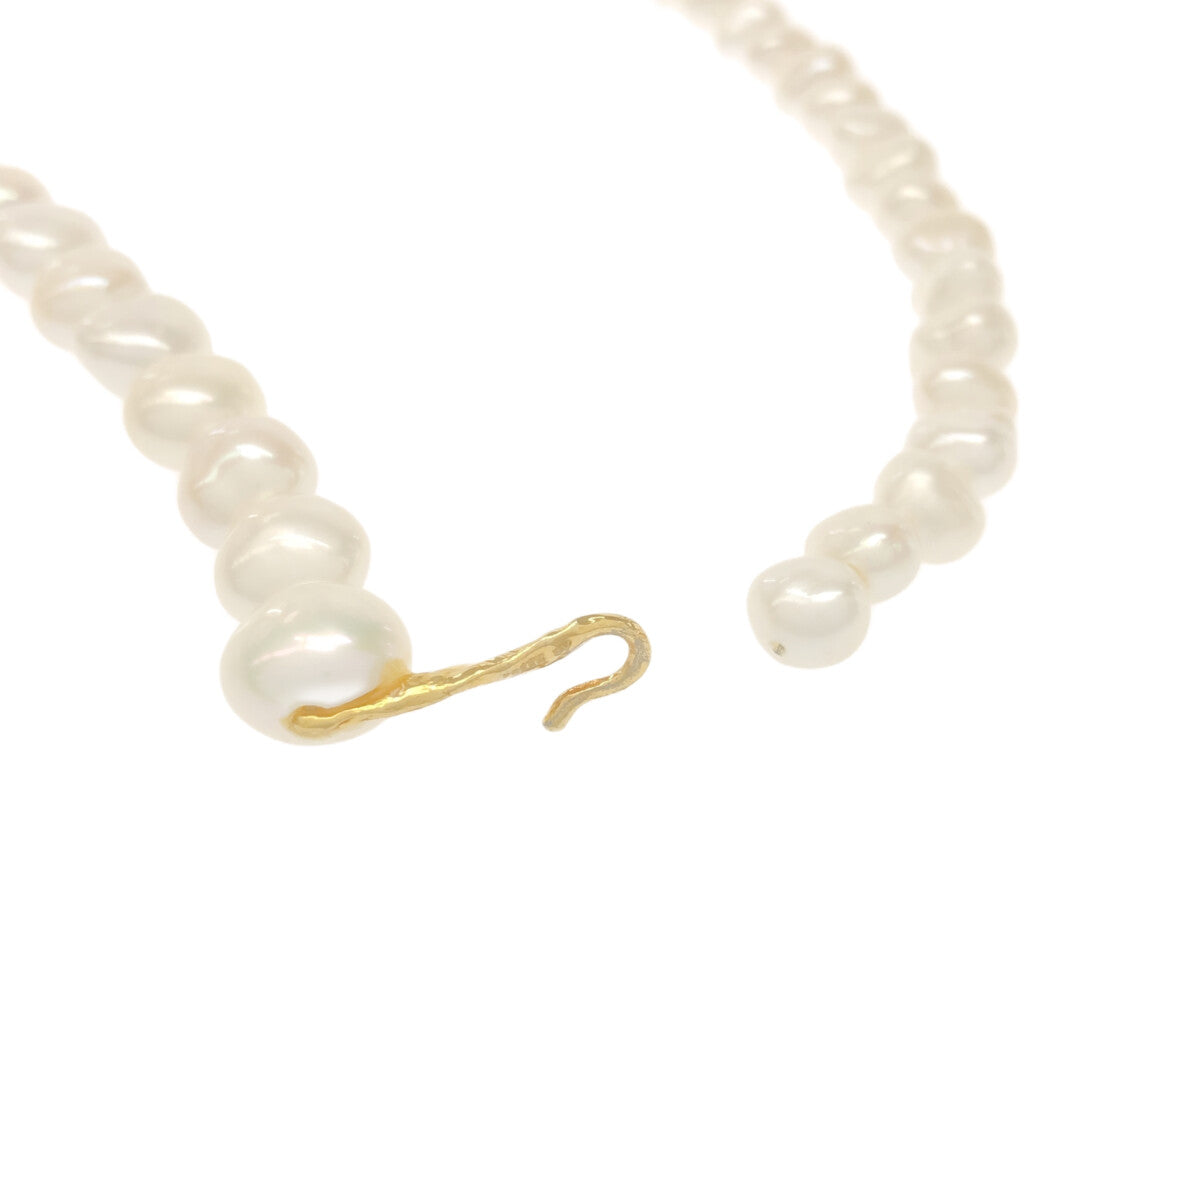 Preek / プリーク | 2022AW | IENA取扱い BAROQUE PEARL LARIAT パールネックレス |